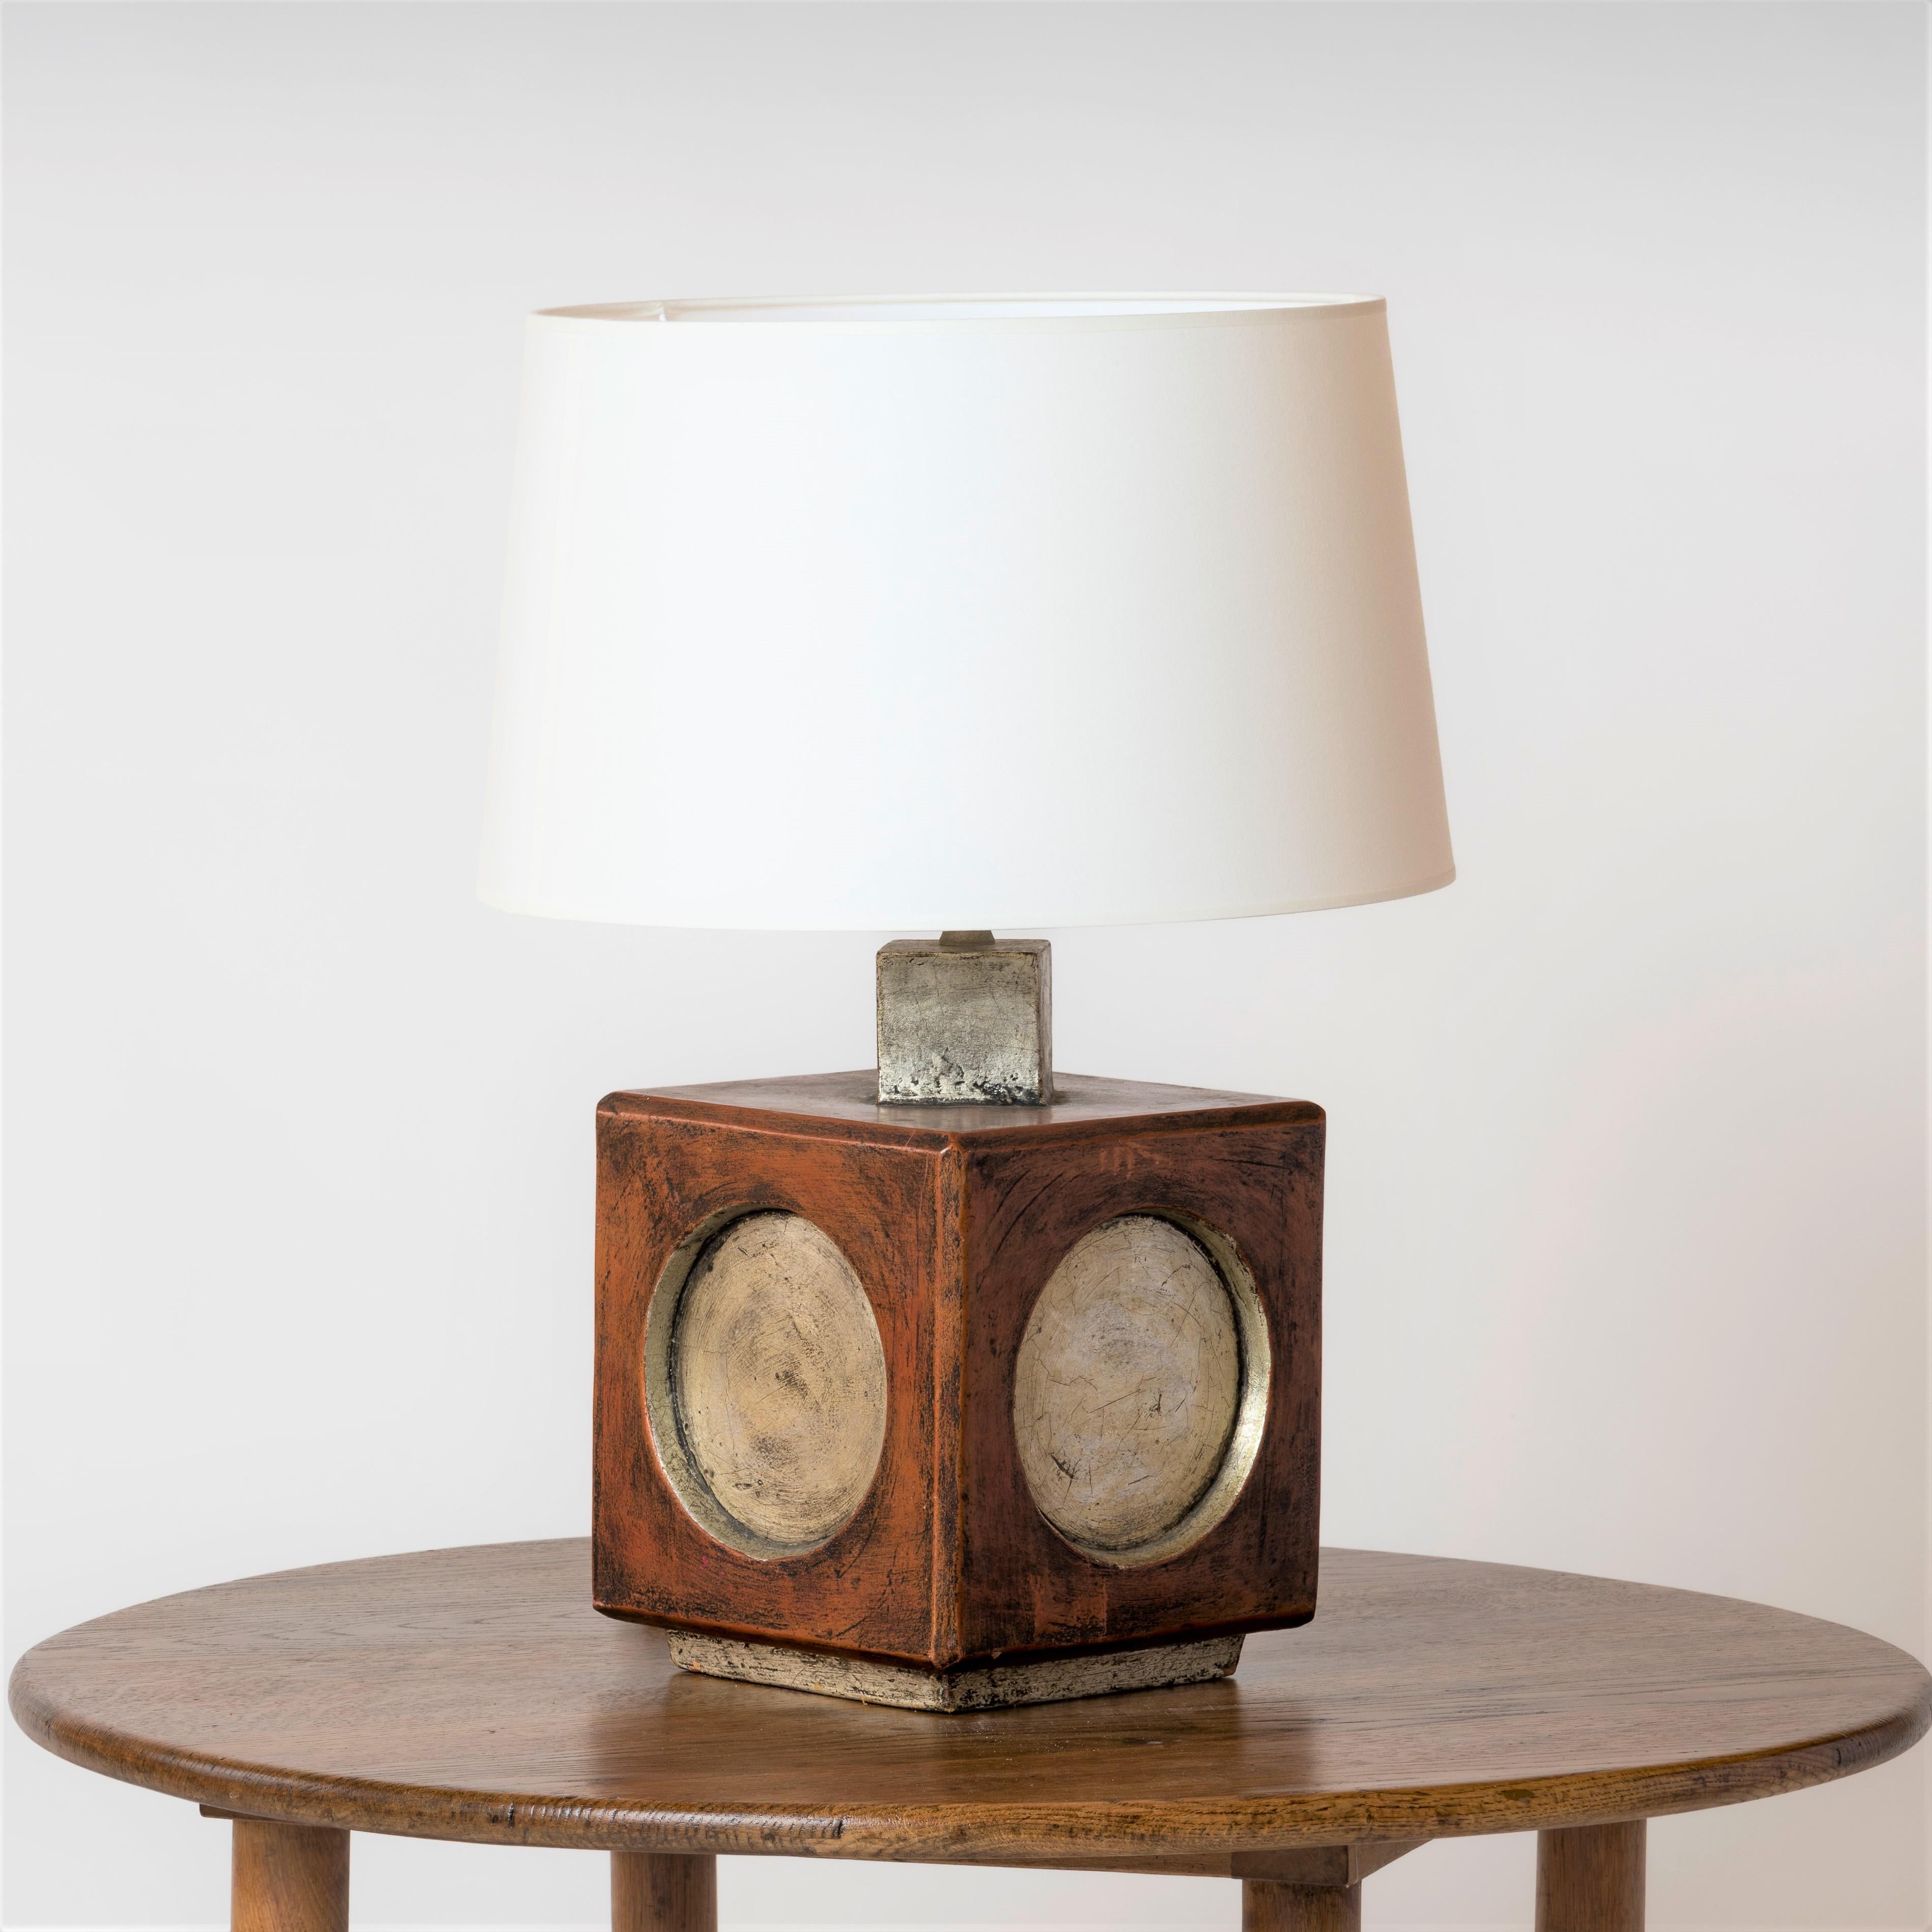 Painted Square Brutalist Terracotta Table Lamp W. Ochre & Silver Accents, Italy, 1970s For Sale